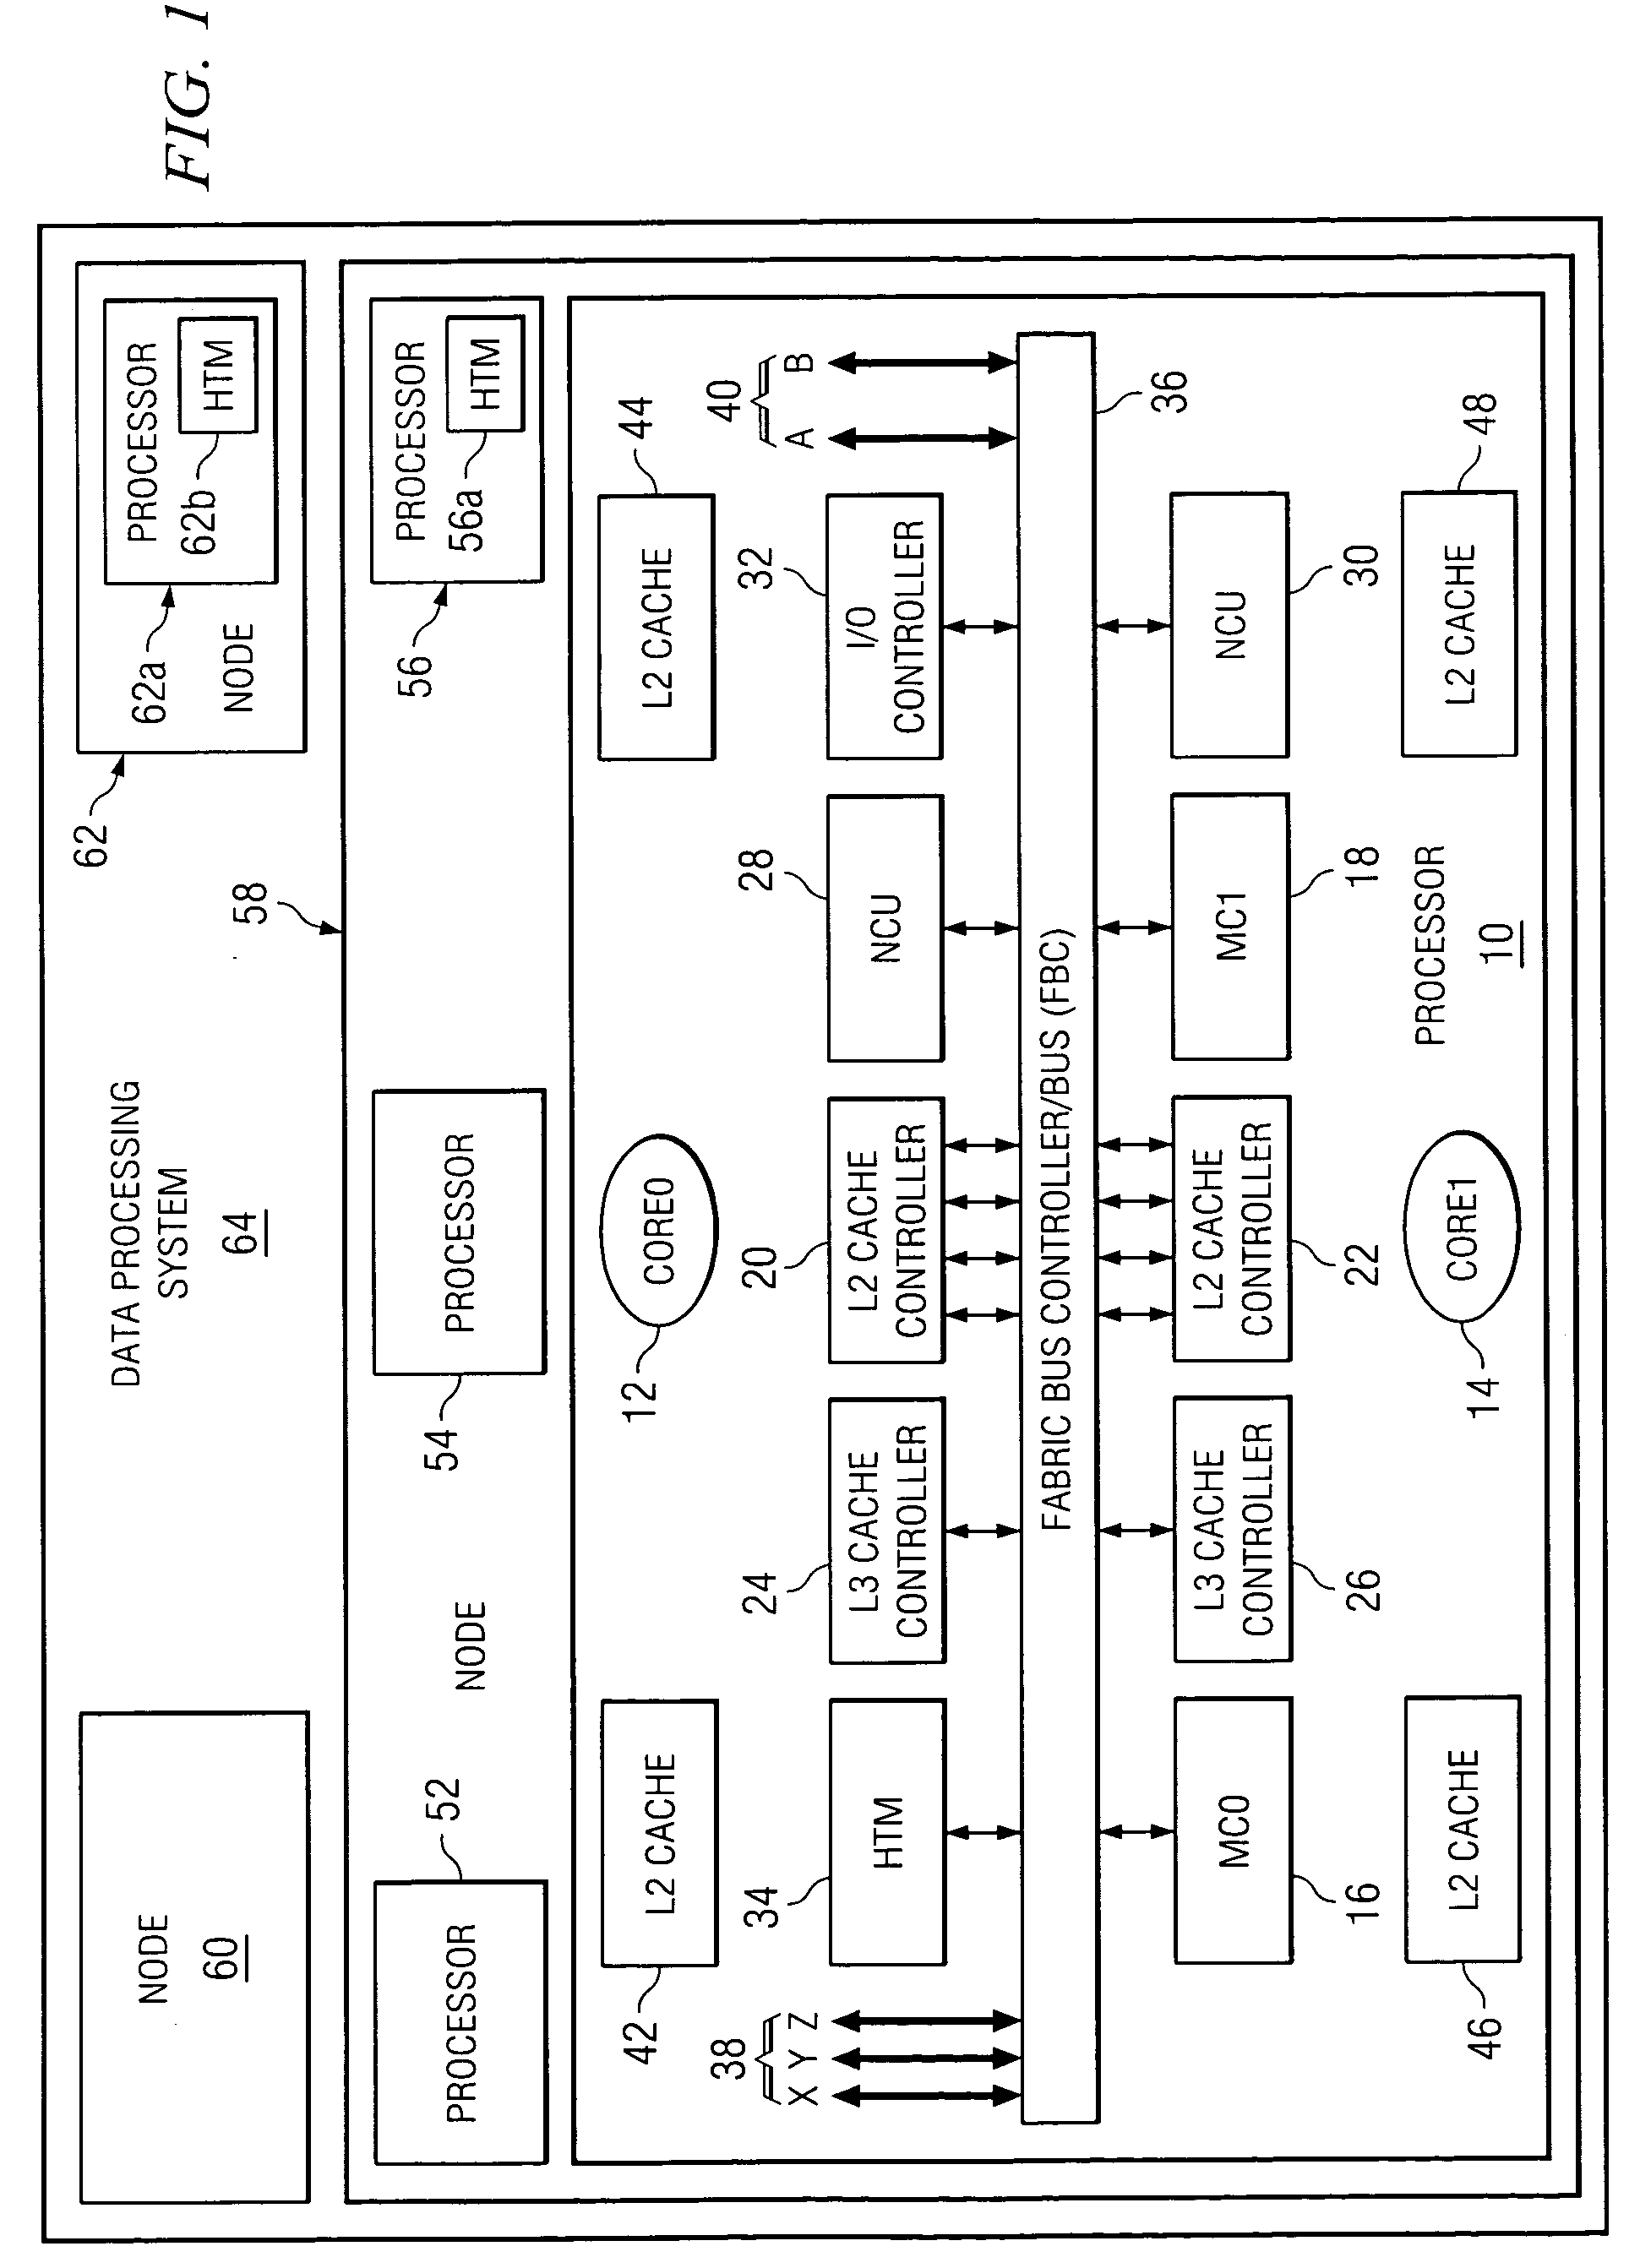 Method, apparatus, and computer program product for synchronizing triggering of multiple hardware trace facilities using an existing system bus